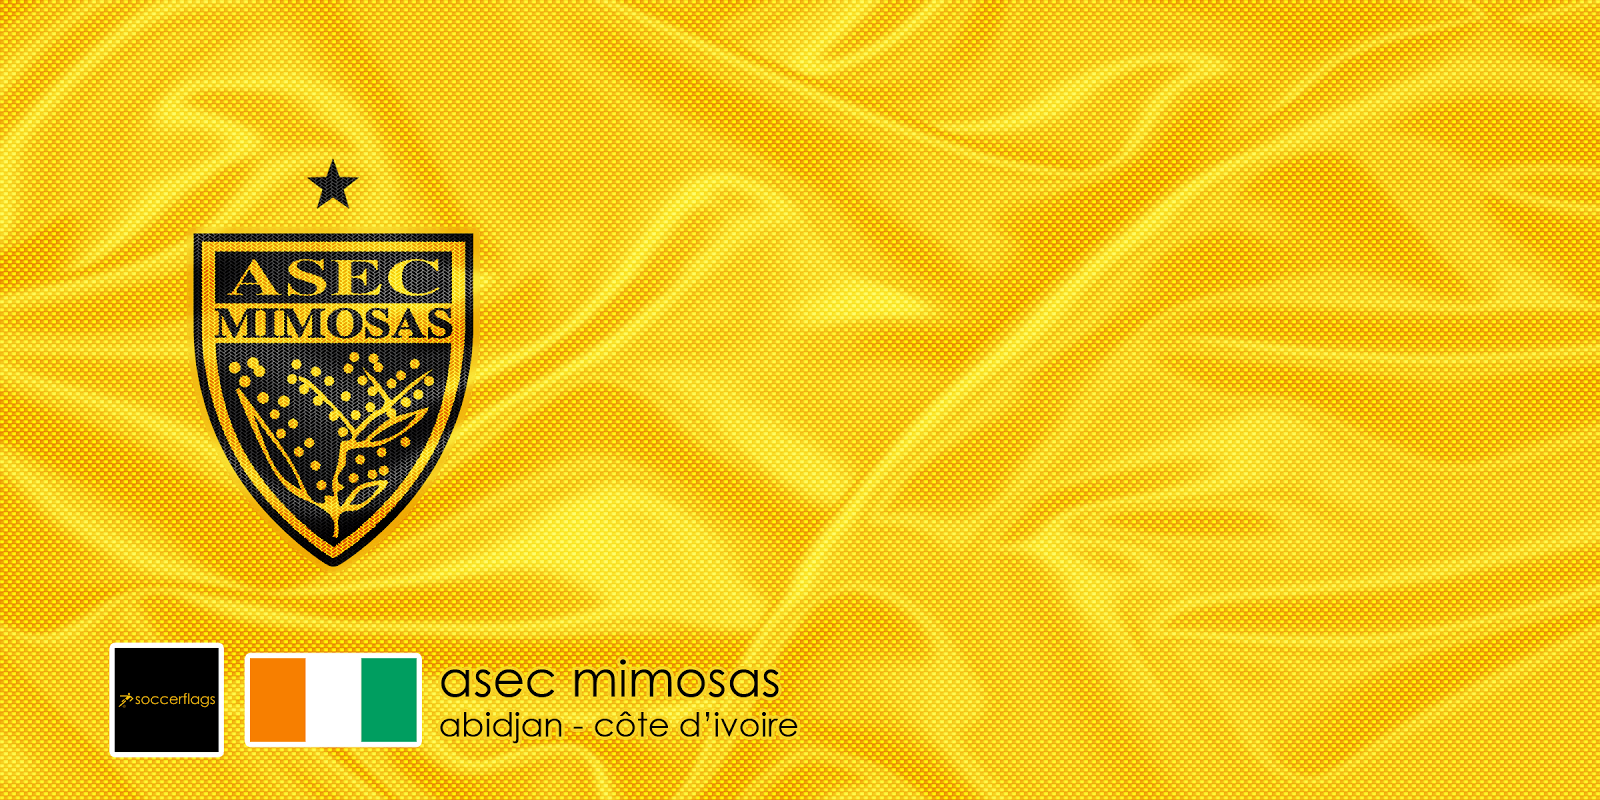 ASEC Mimosas: Conquering Africa